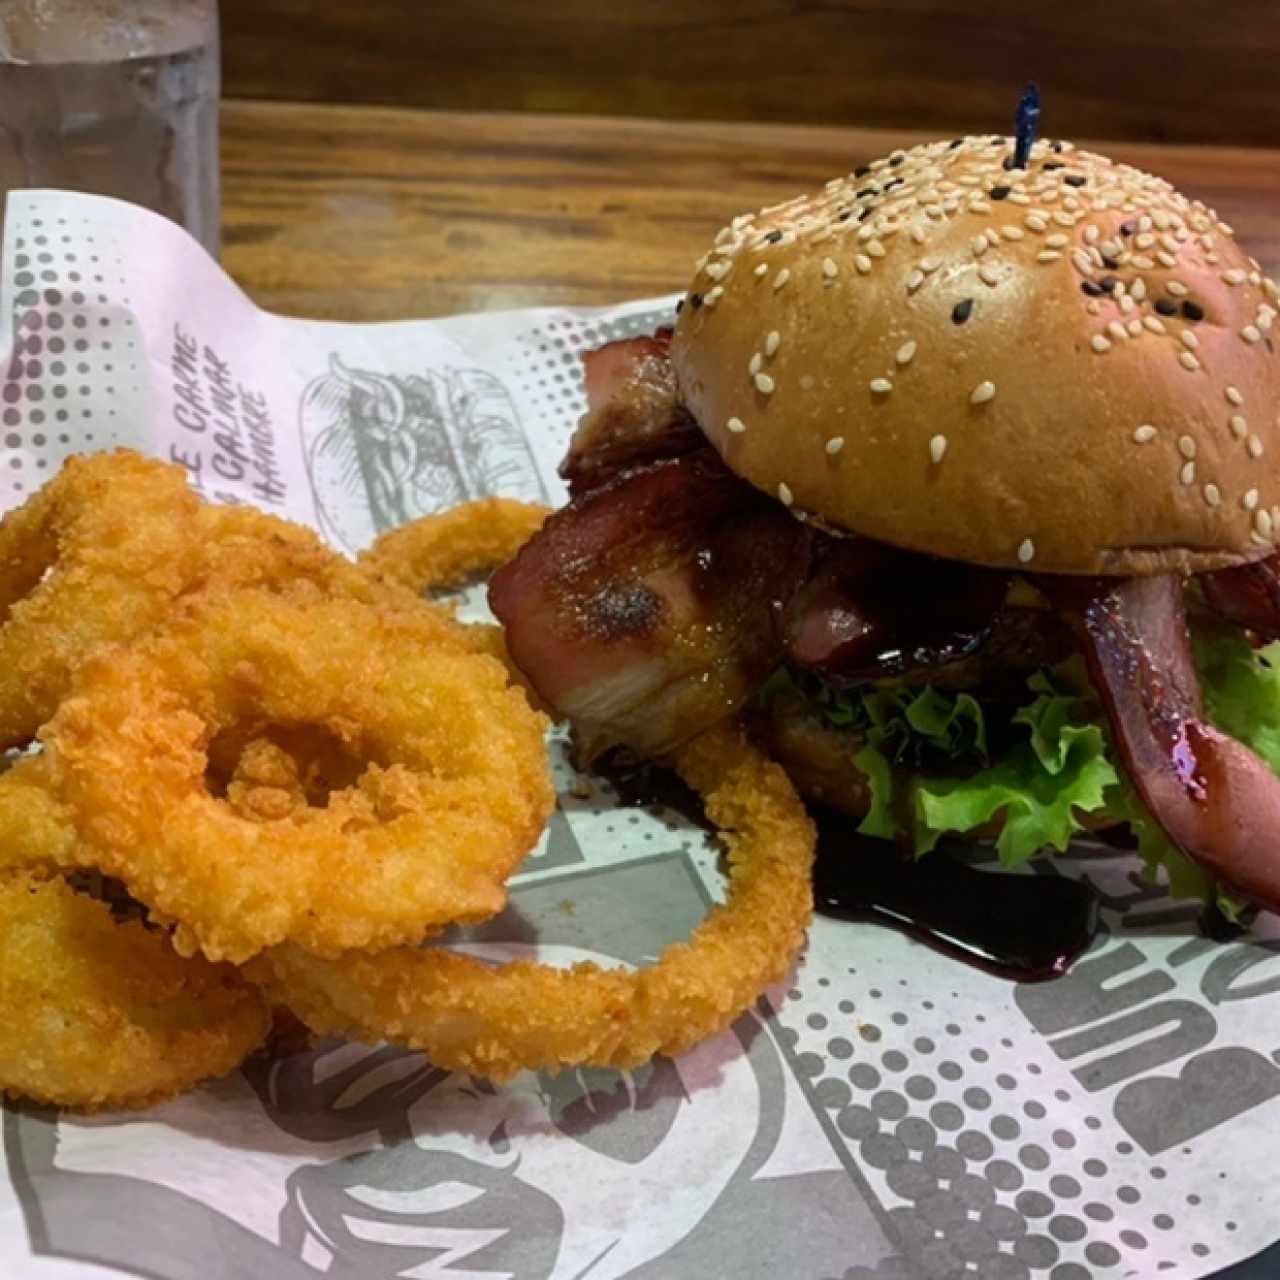 Signature Burgers - Bacon Lovers